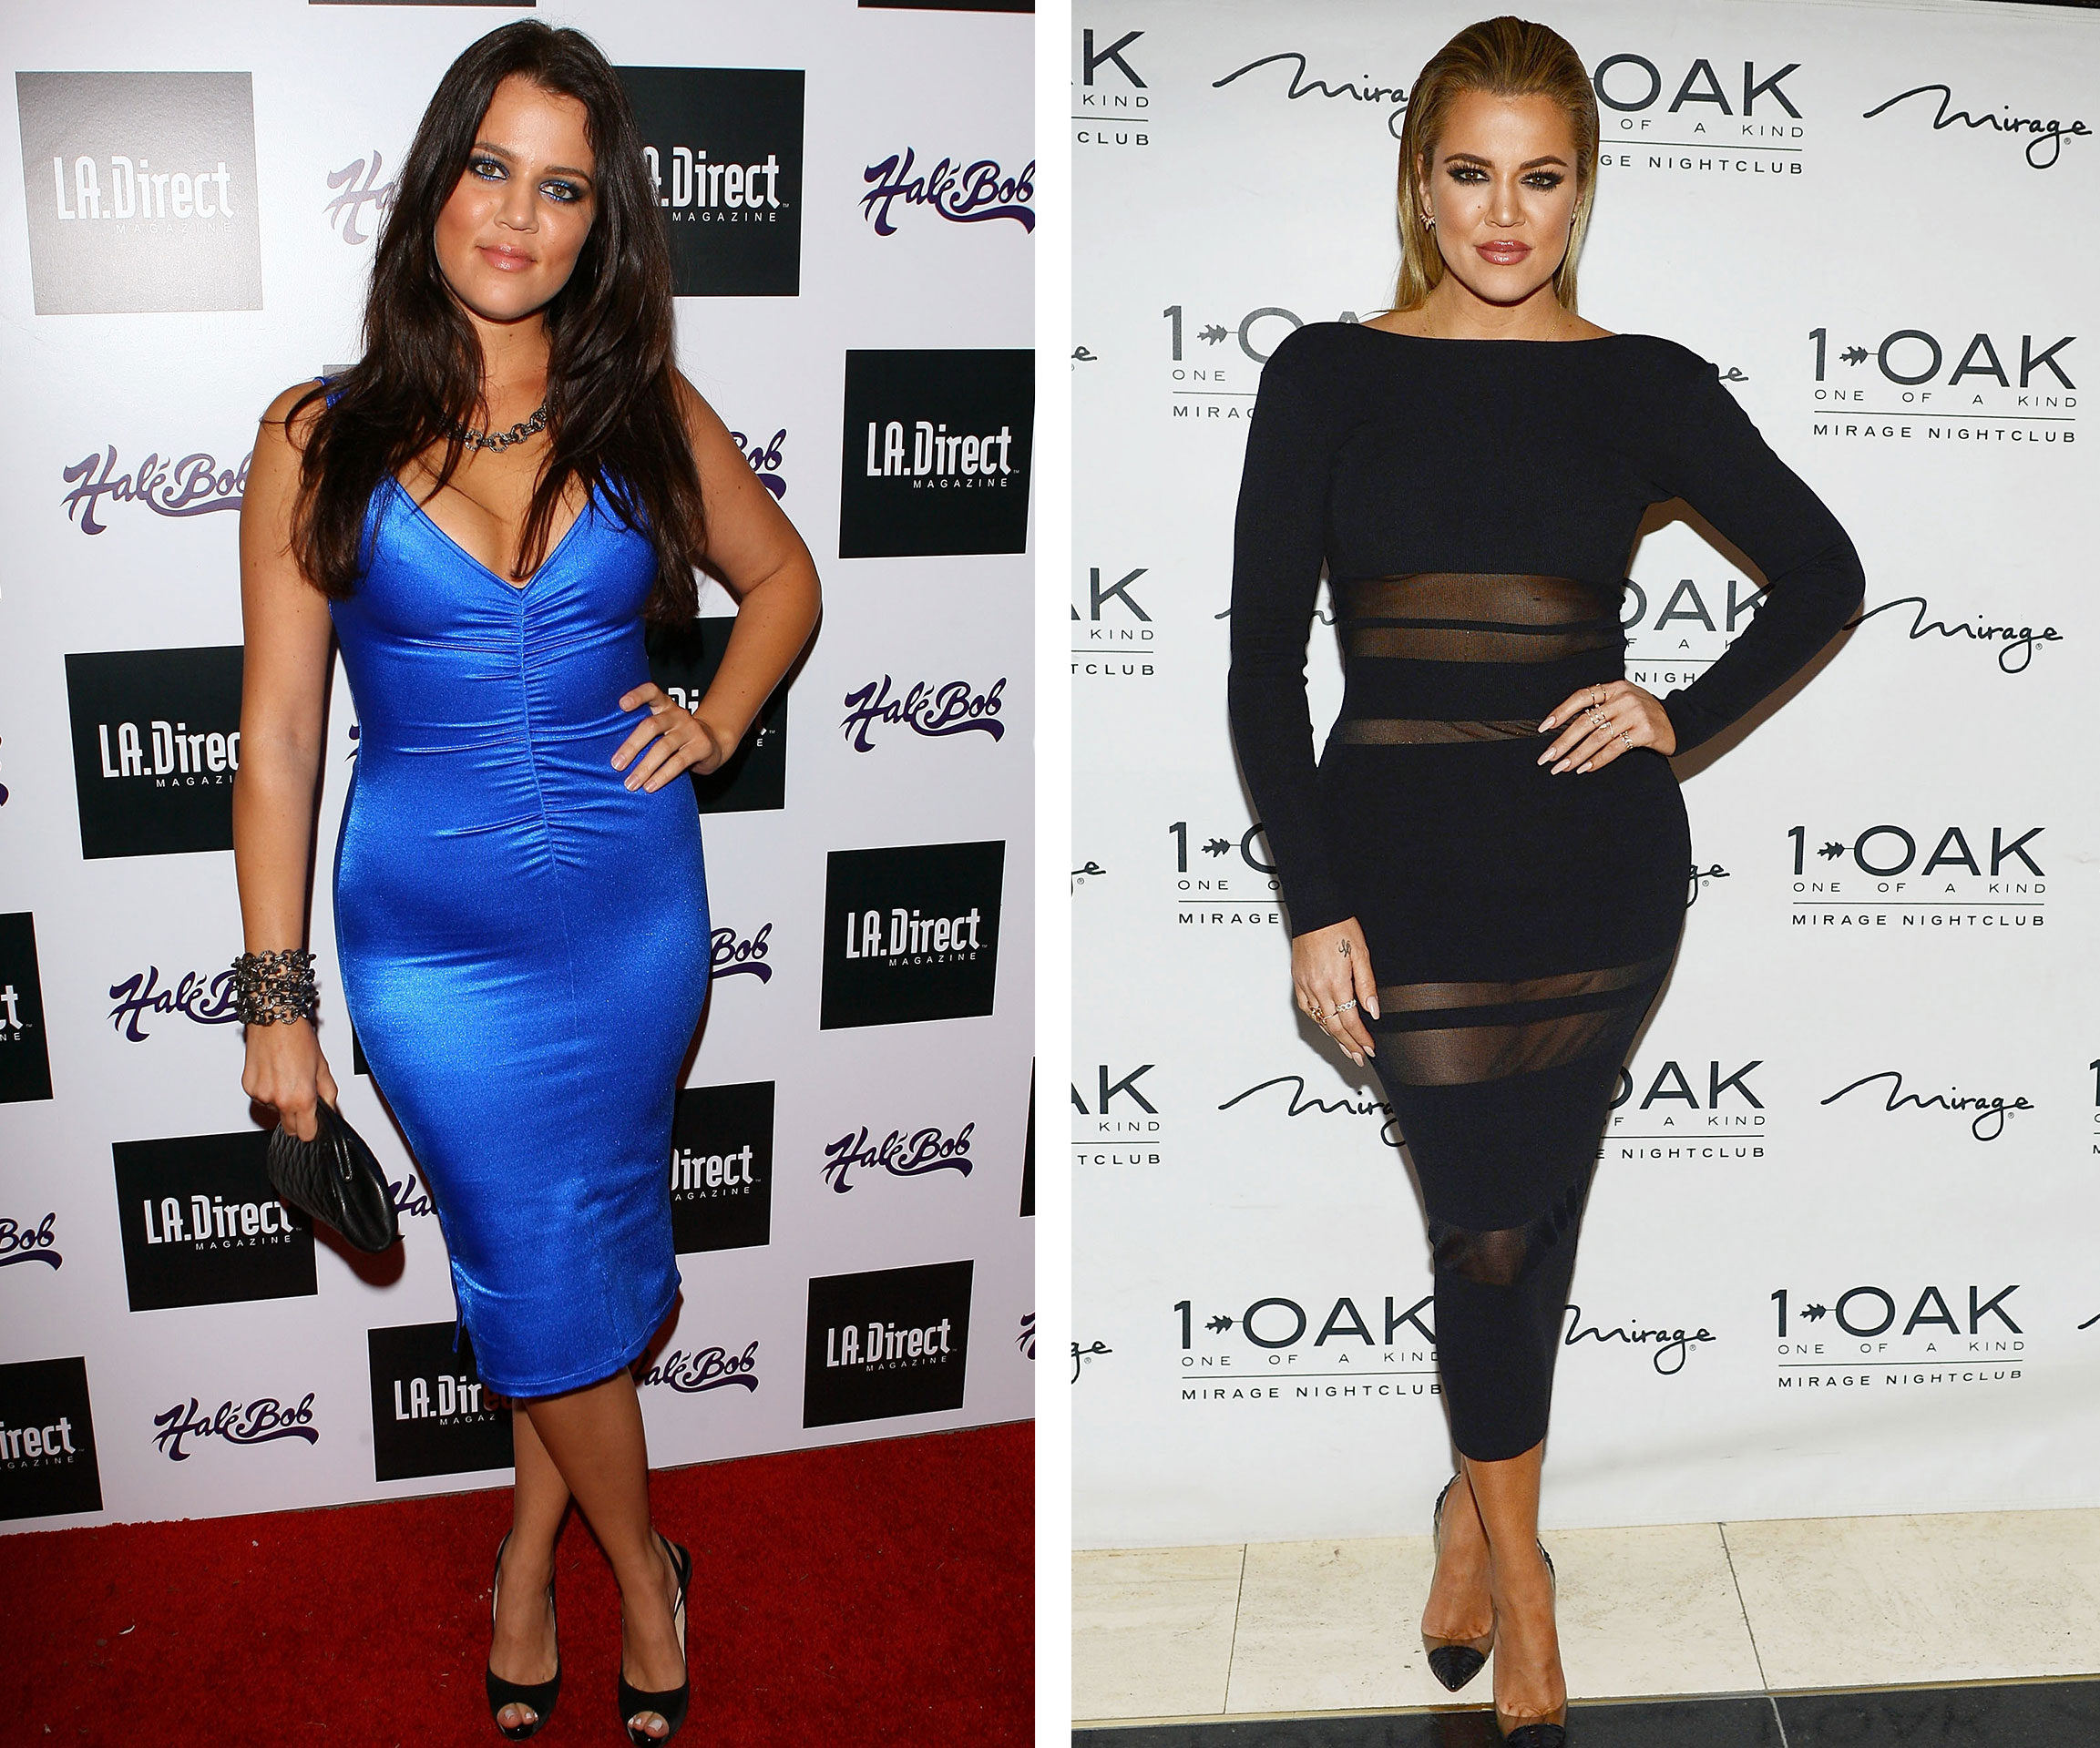 Khloe Kardashian The New Beyonce After 40-Pound Weight Loss